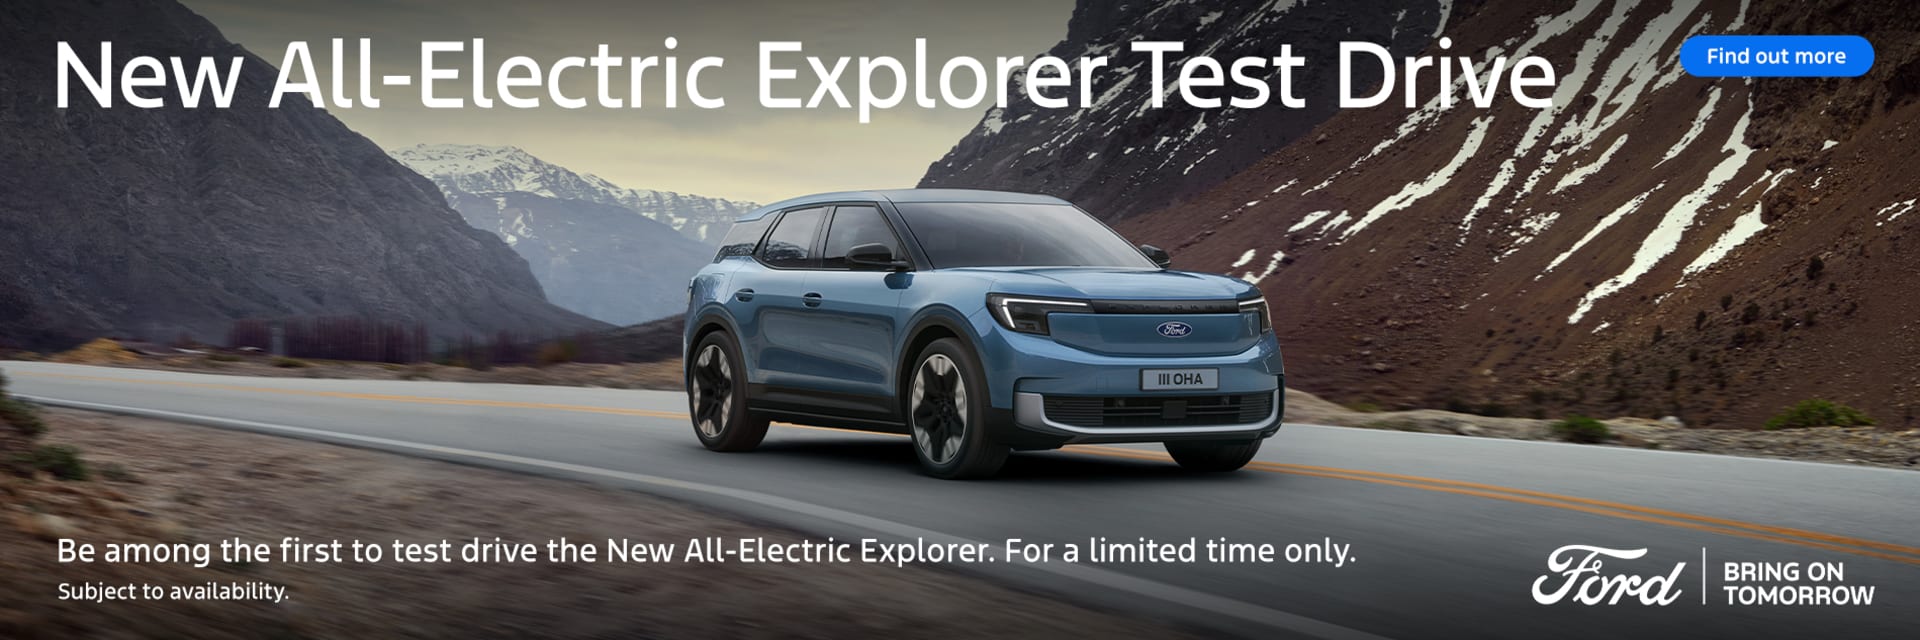 New All-Electric Explorer 